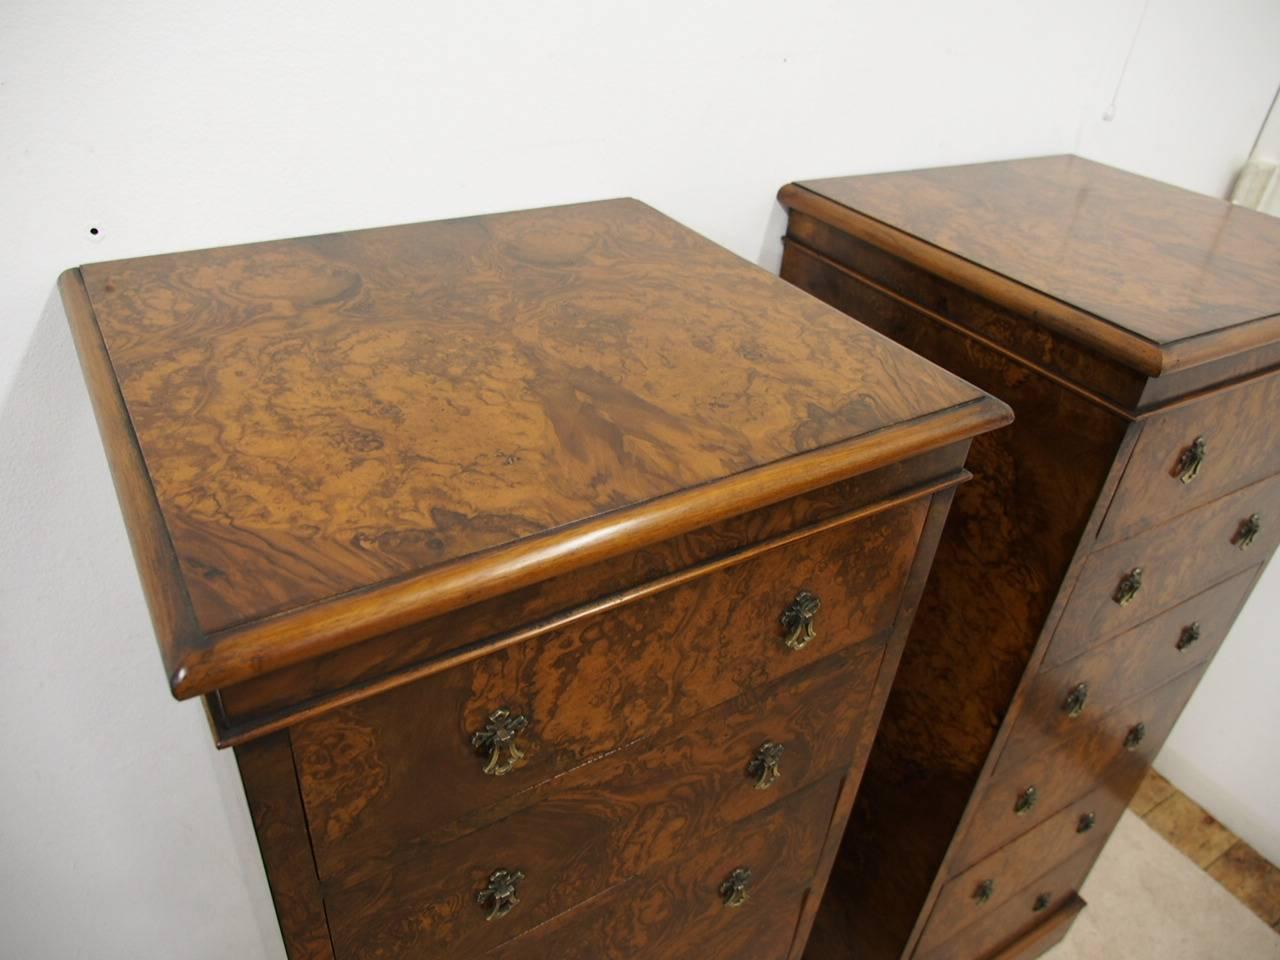 Rare pair of late Victorian burr walnut, tall chest of drawers, circa 1890s with alterations. Made in the wellington chest style, each has six graduated drawers and their original brass drop handles. The rectangular top with a rounded moulding sits